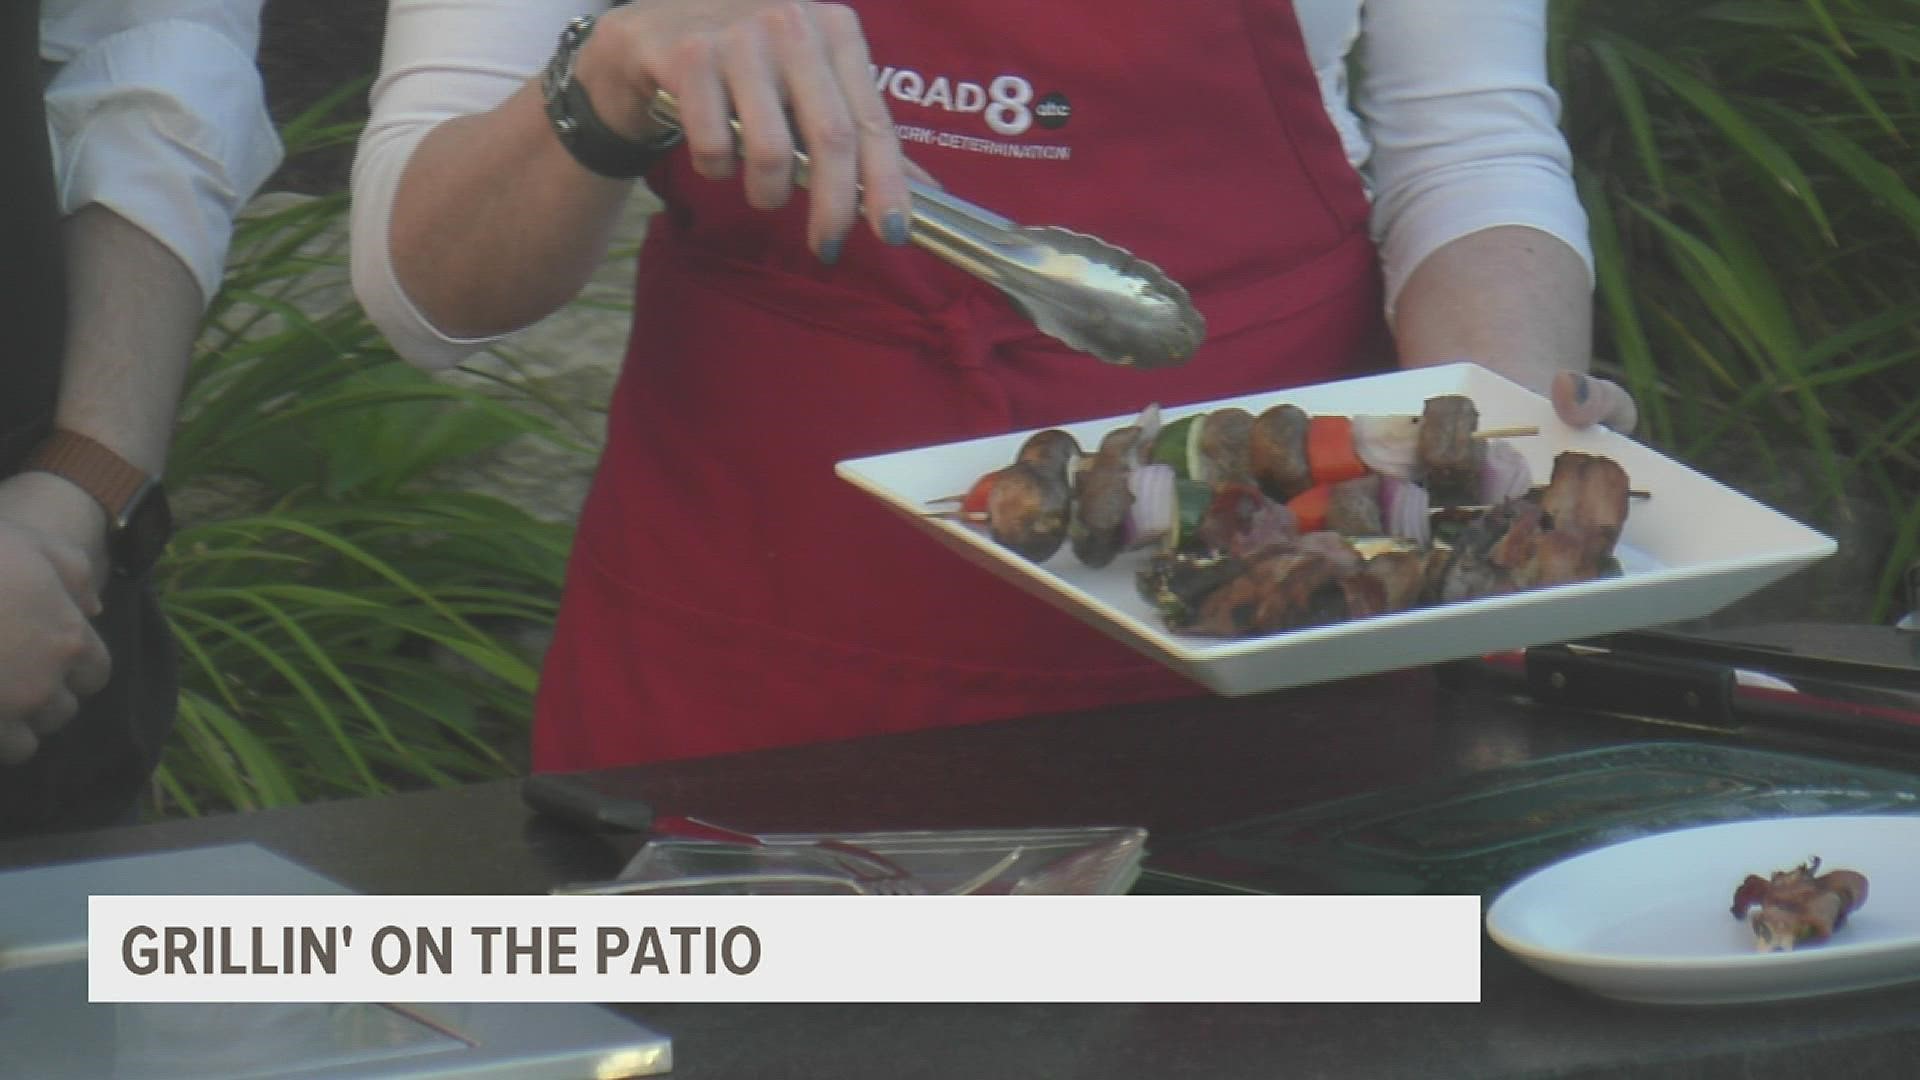 Watch as News 8's David Bohlman, Linda Swinford and Andrew Stutzke grill some colorful steak kabobs and peaches.